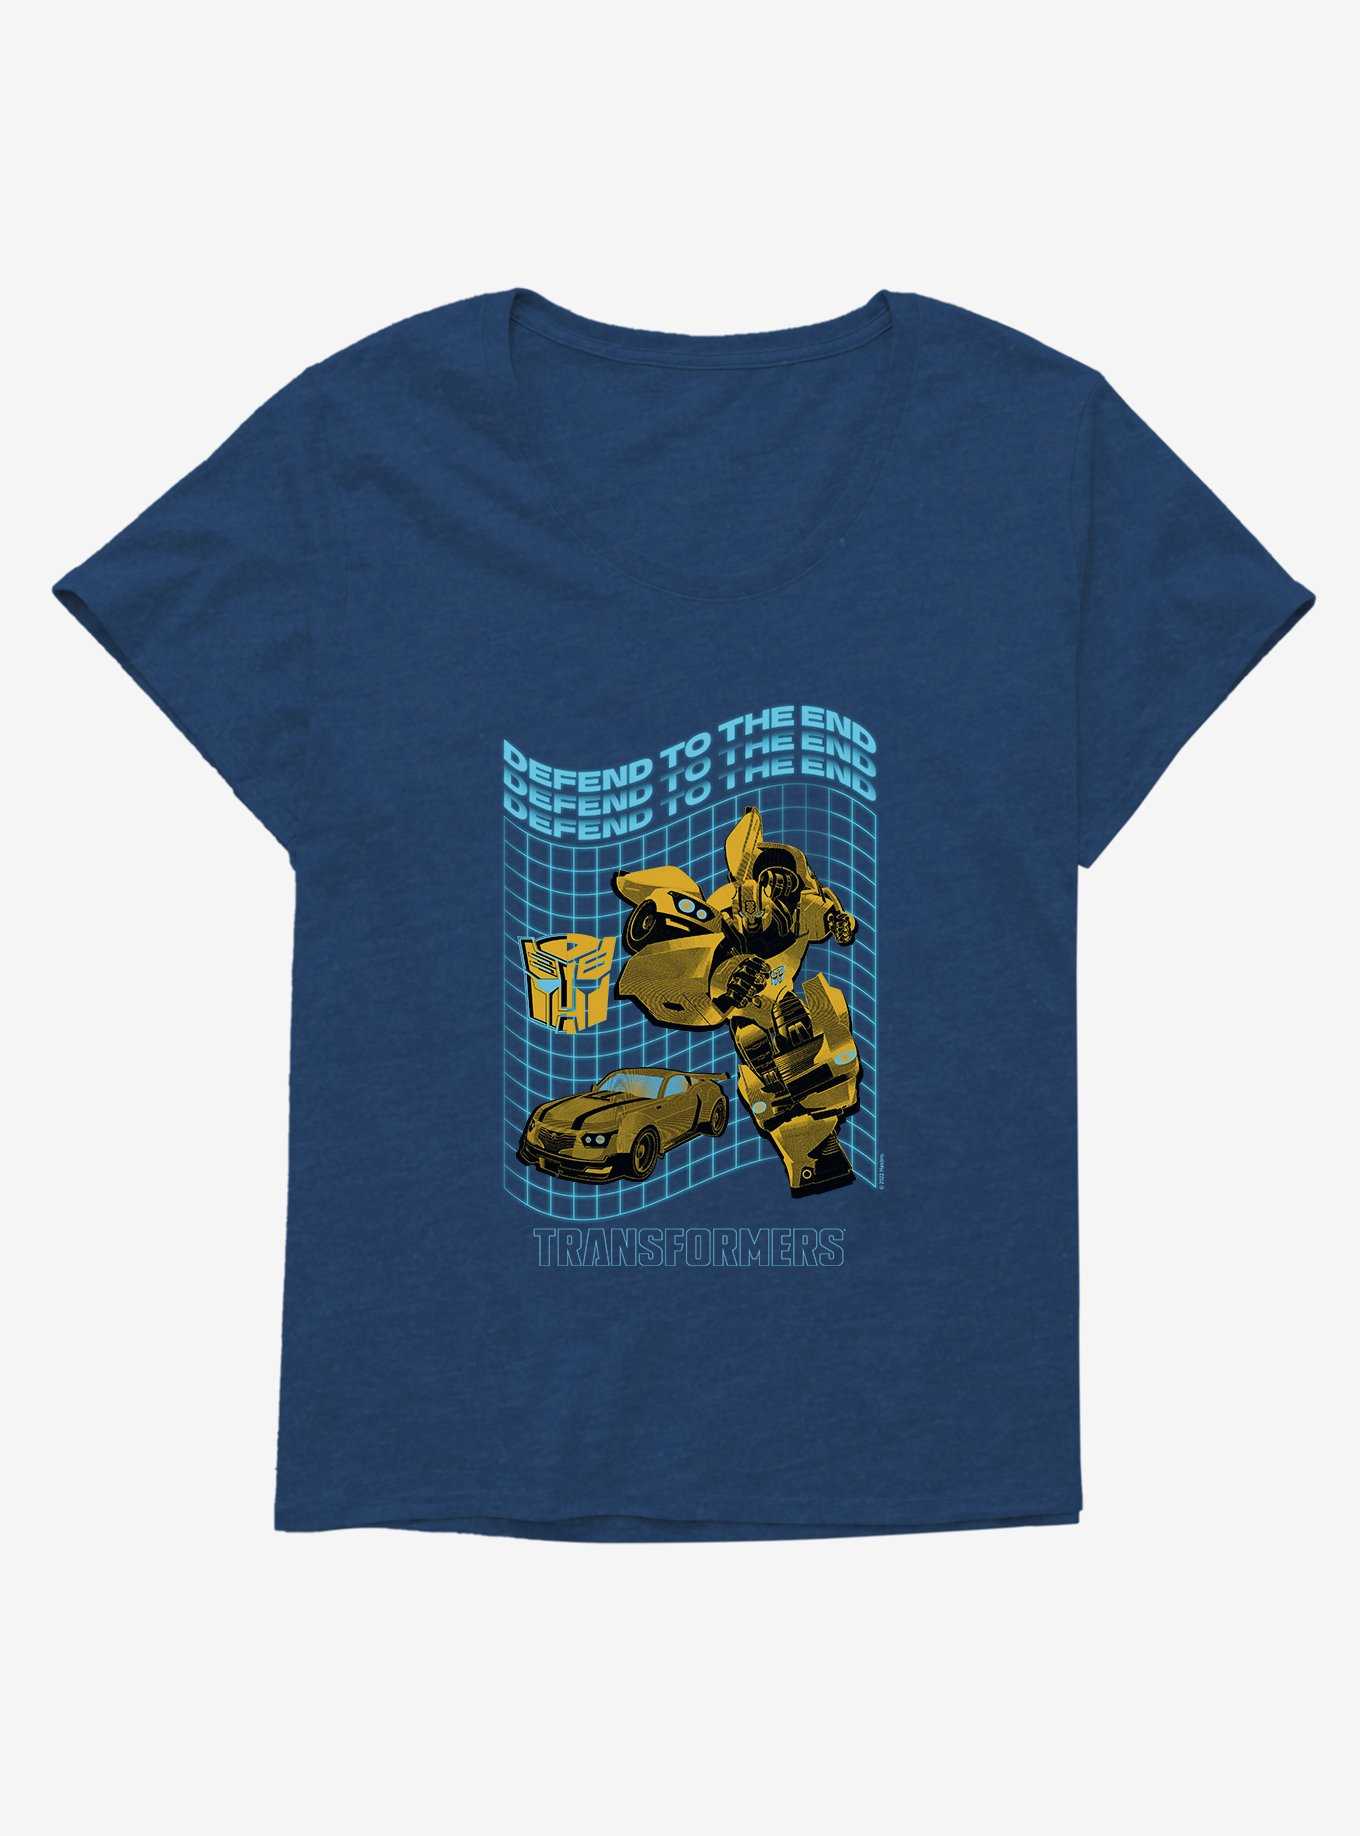 Transformers Defend To The End Bumblebee Girls T-Shirt Plus Size, , hi-res